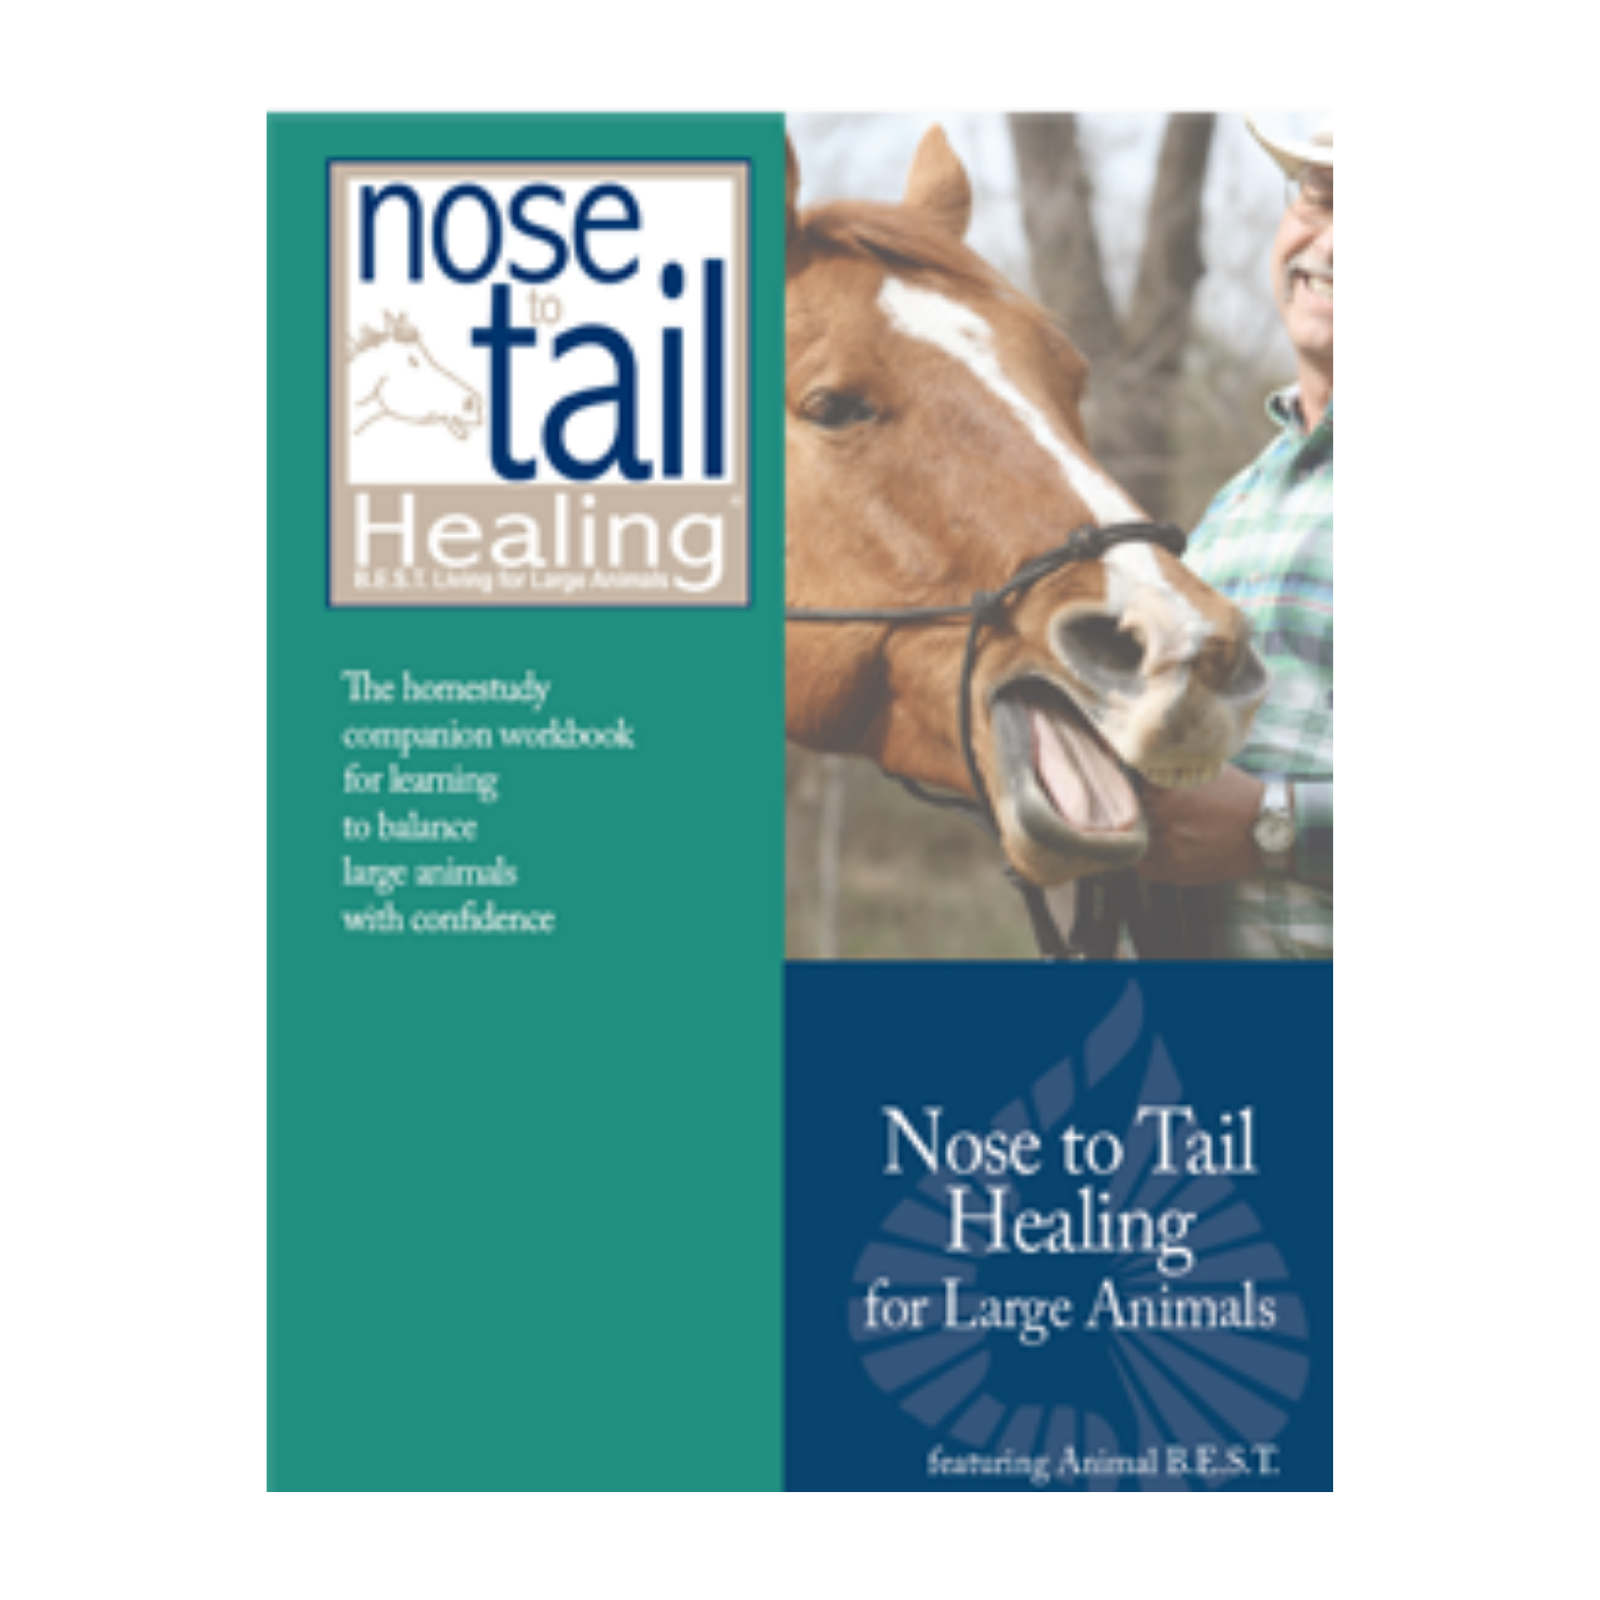 Nose to Tail Healing Homestudy Course (Large Animals)